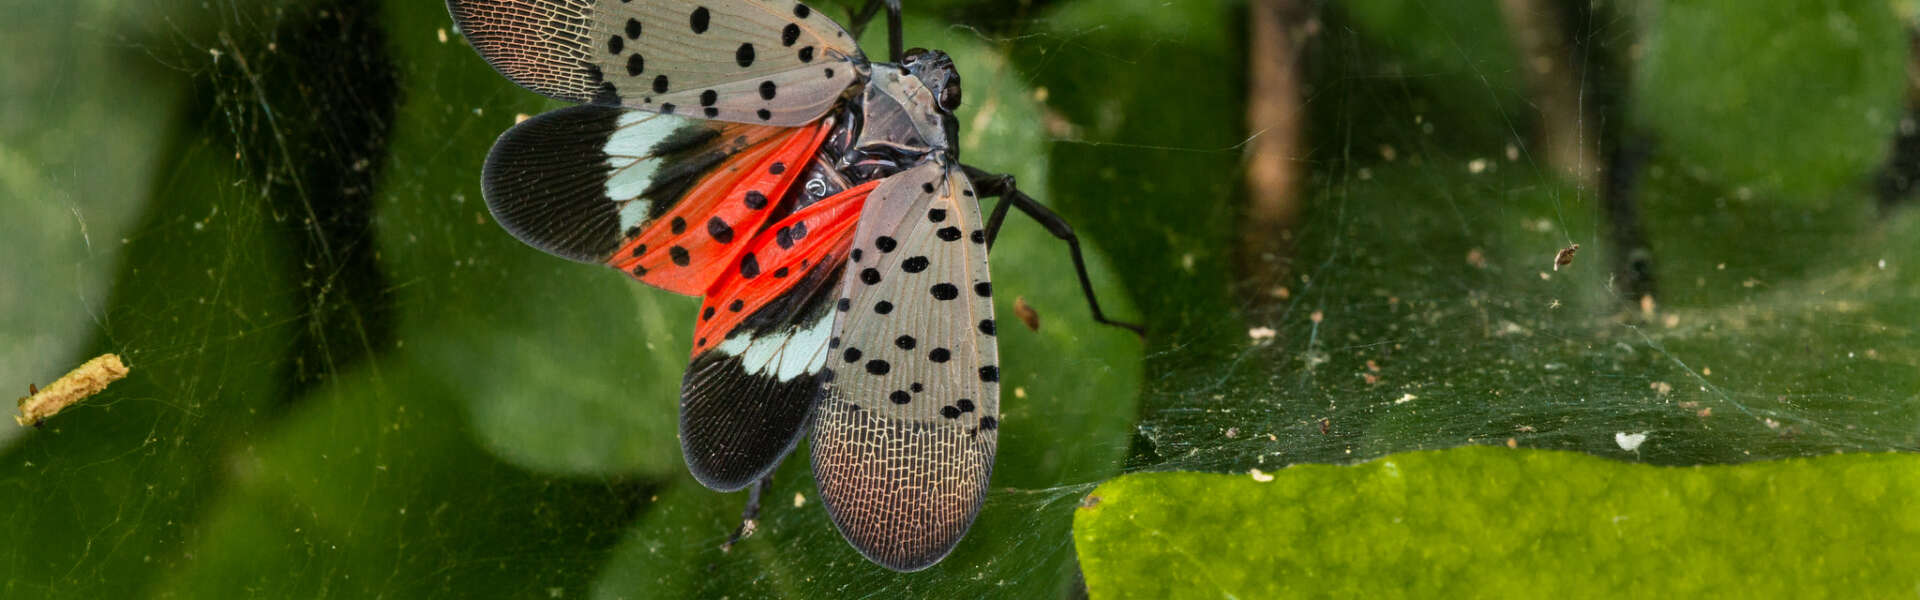 A brown, black and red fly with black spots on its wings sits on a spider web over green leaves.